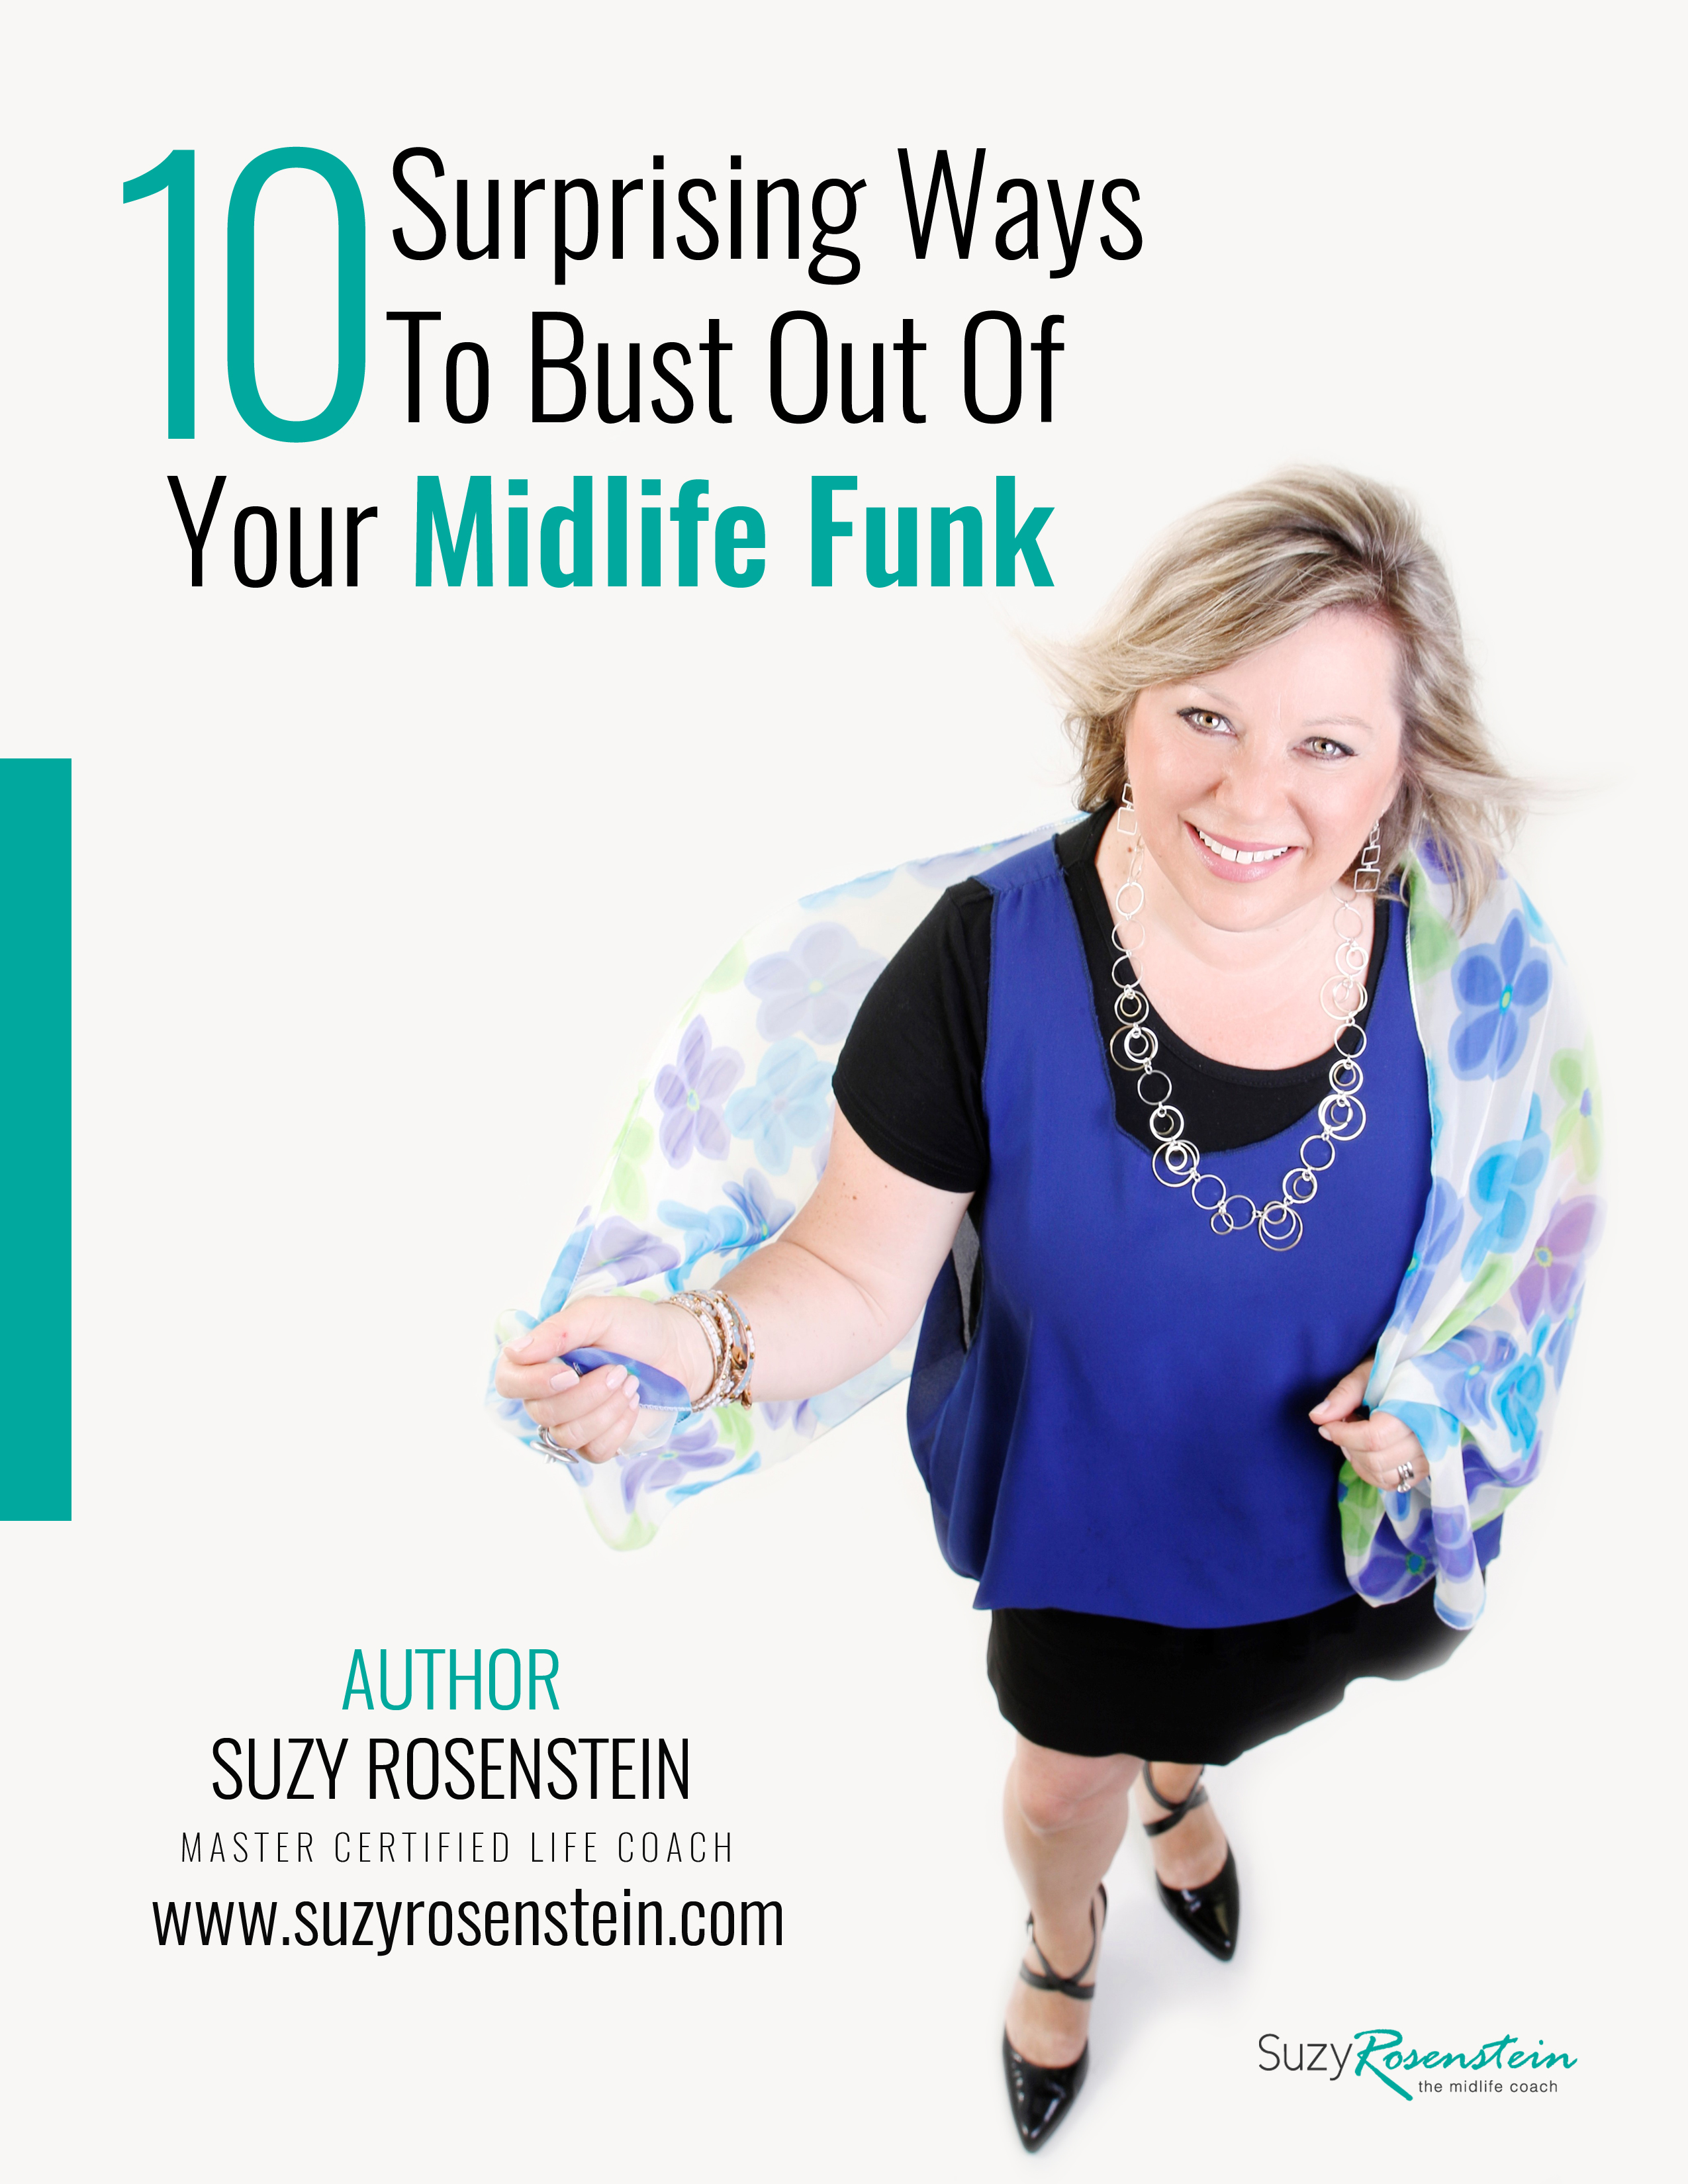 Claim Your 10% Discount Coupon & Download 10 Surprising Ways To Bust Out Of Your Midlife Funk